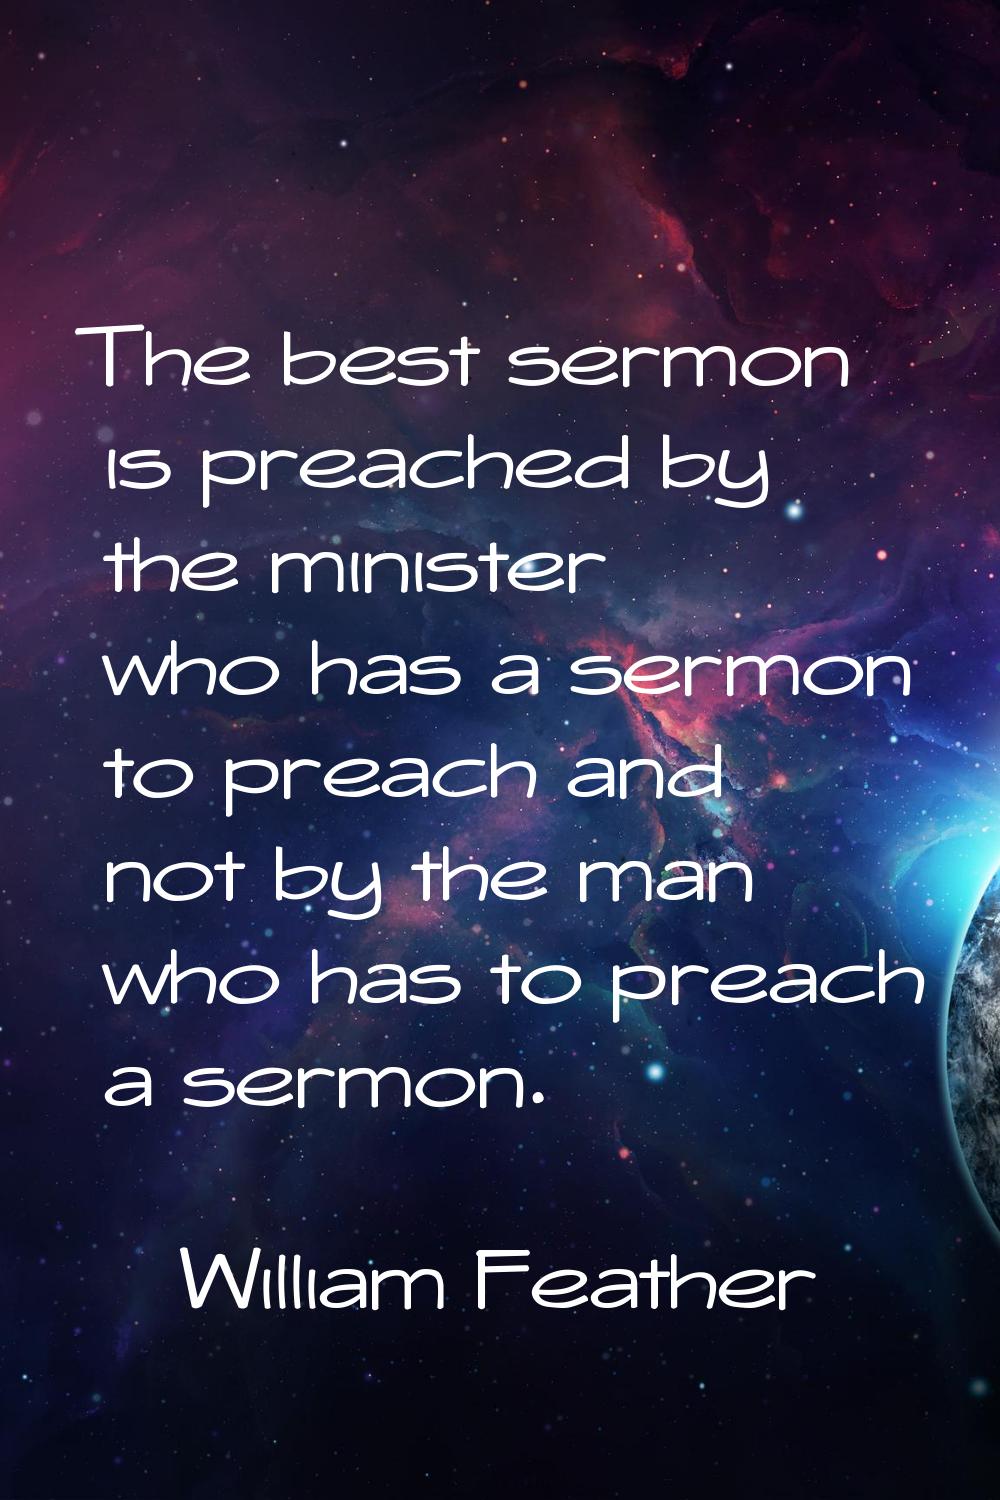 The best sermon is preached by the minister who has a sermon to preach and not by the man who has t